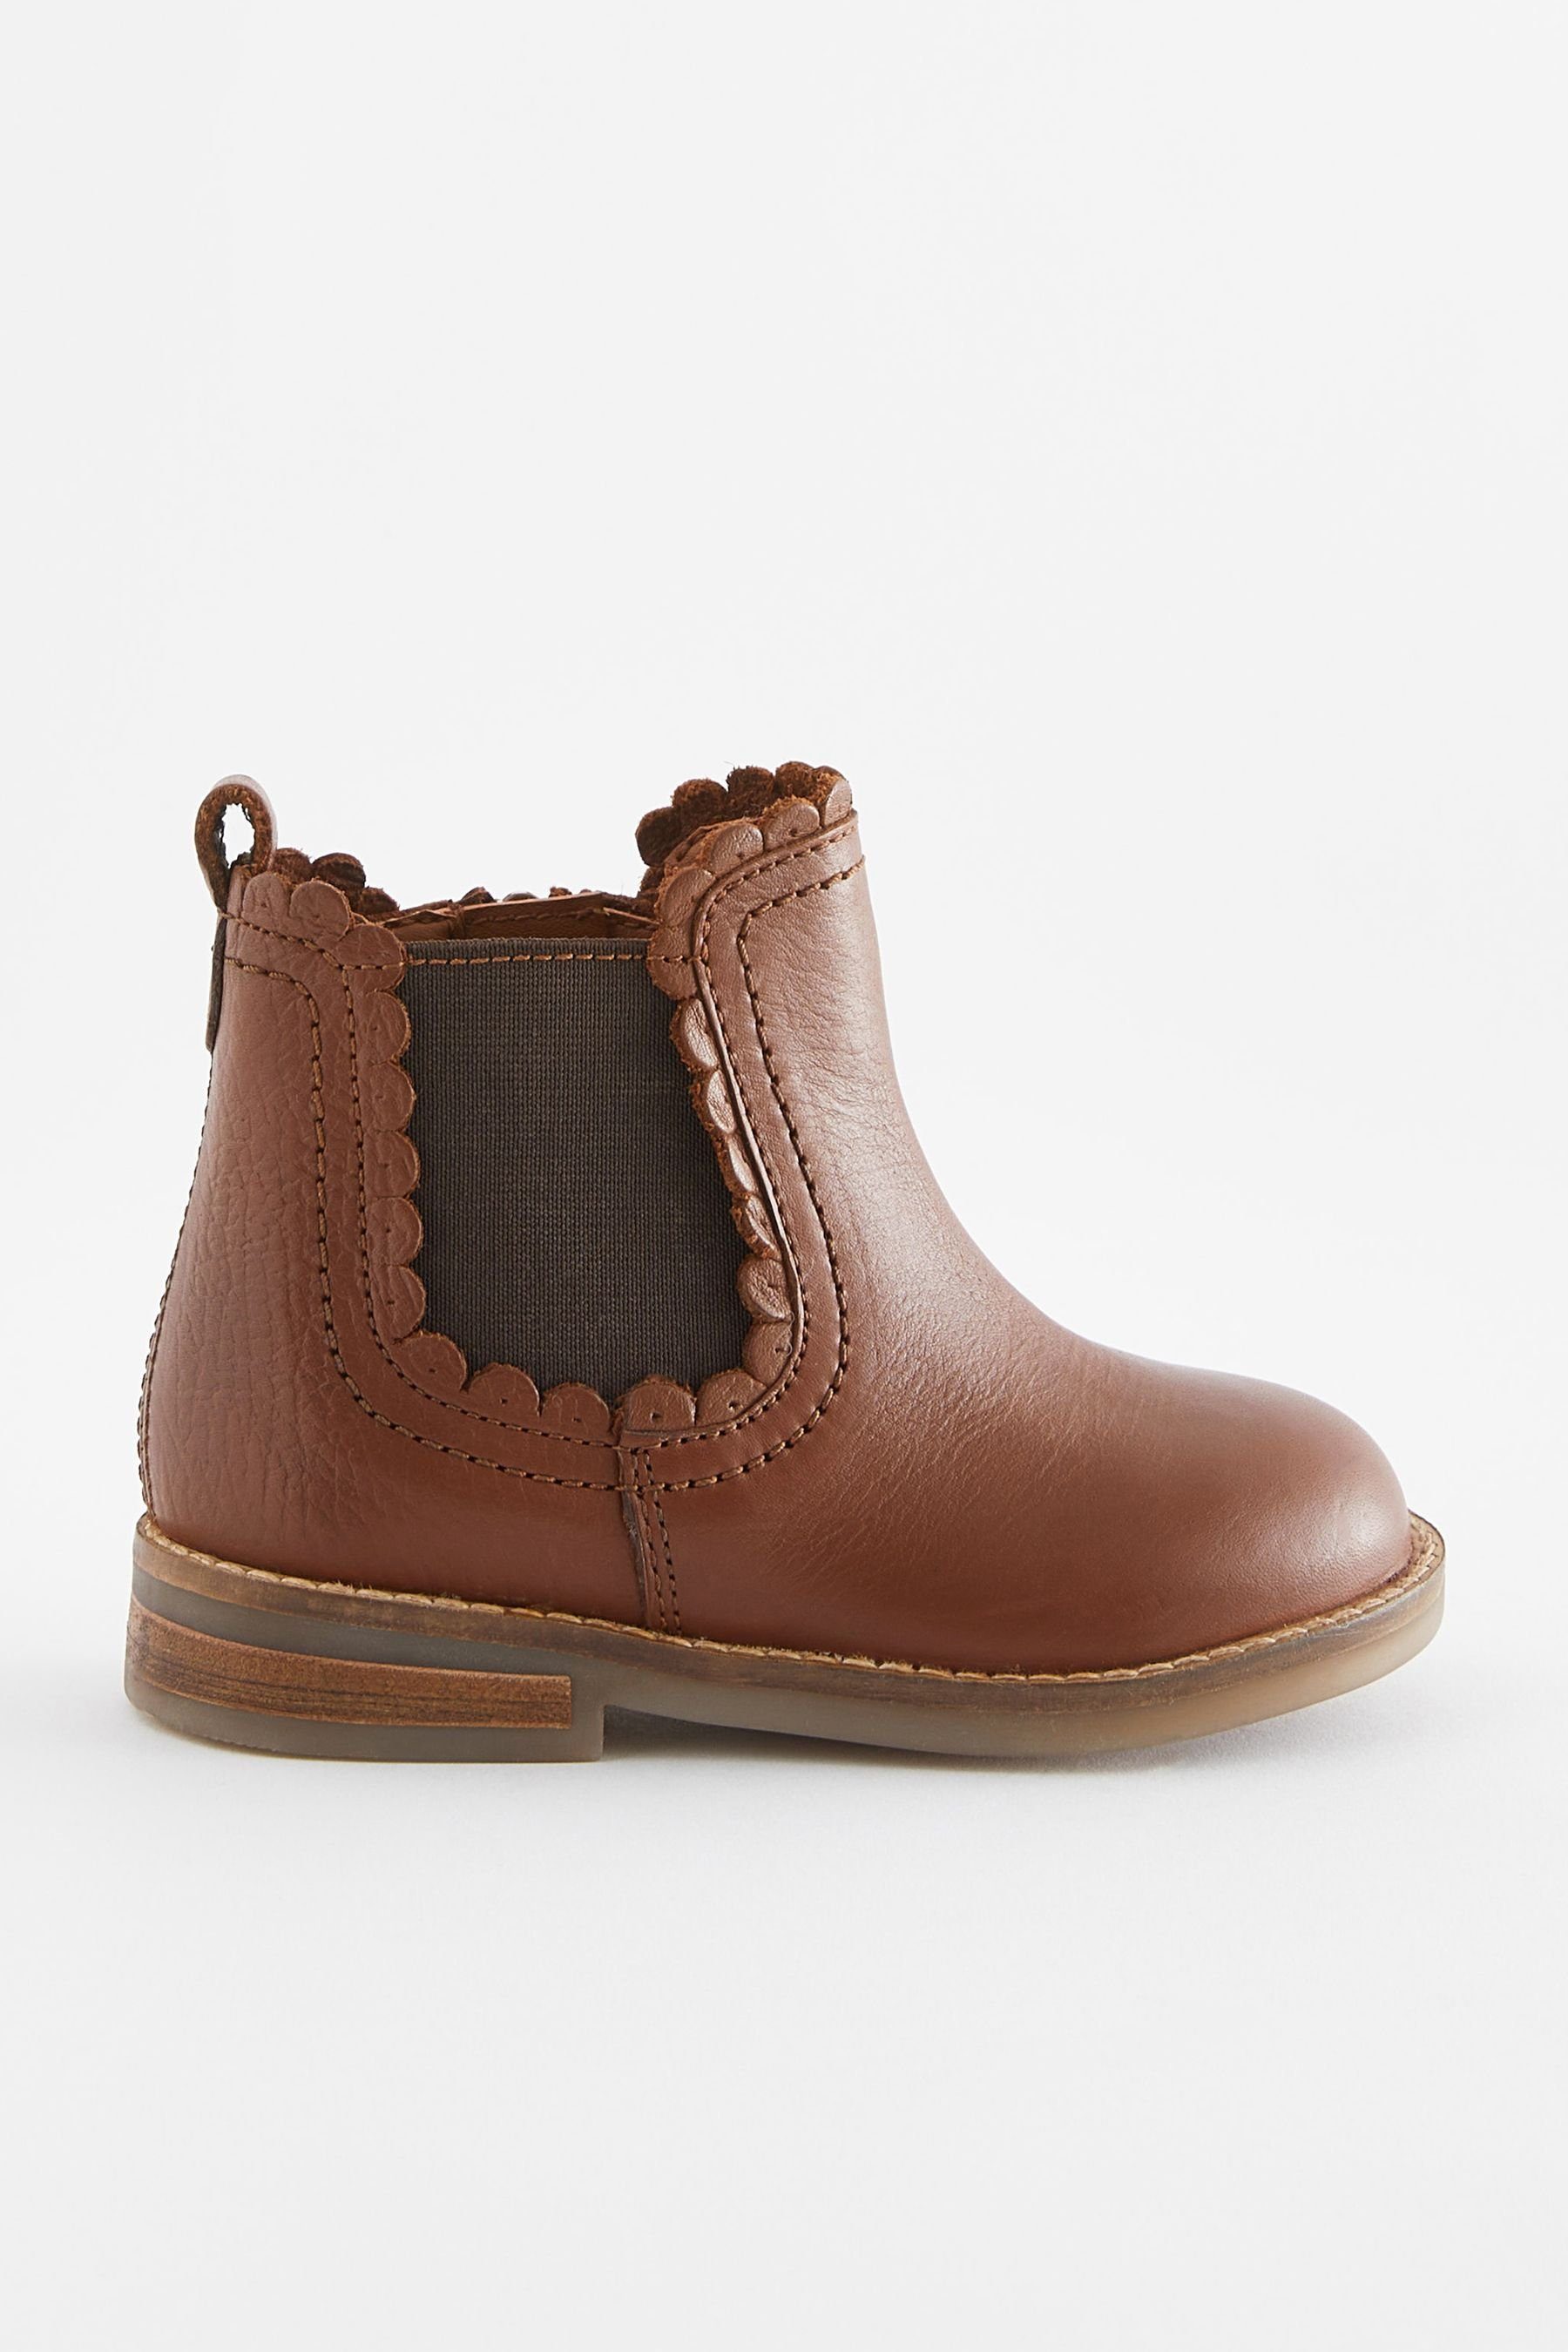 Leather Muschelkante Next Brown Tan (1-tlg) Chelseaboots mit Chelsea-Boot